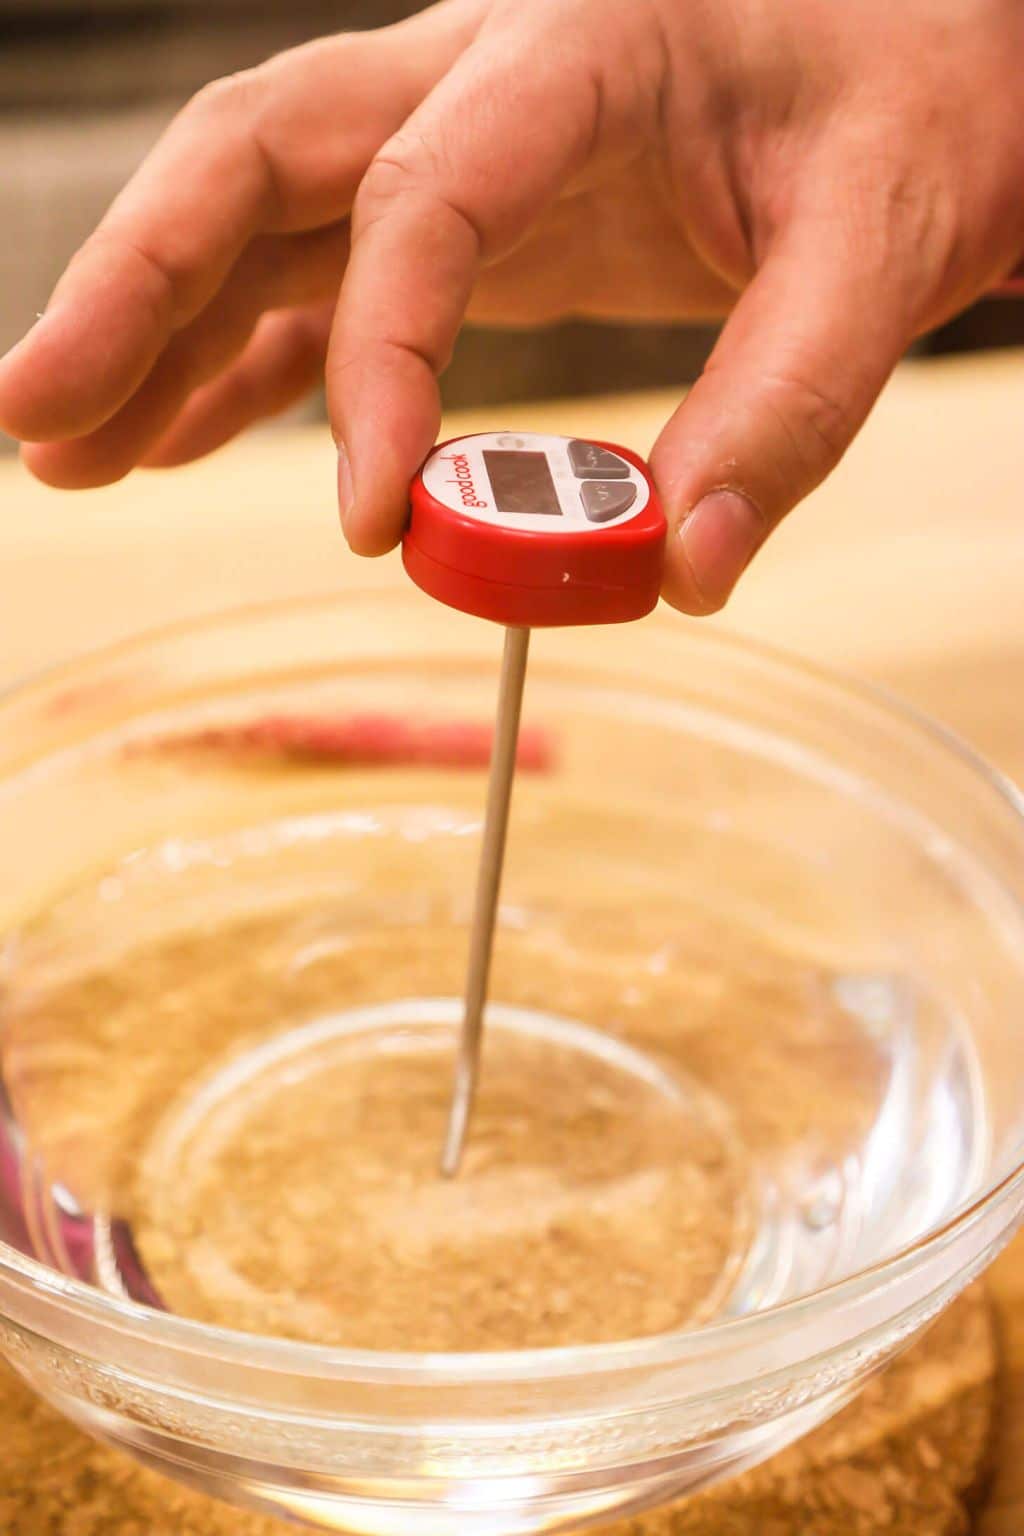 Cooking Safely: Calibrate Your Thermometer 